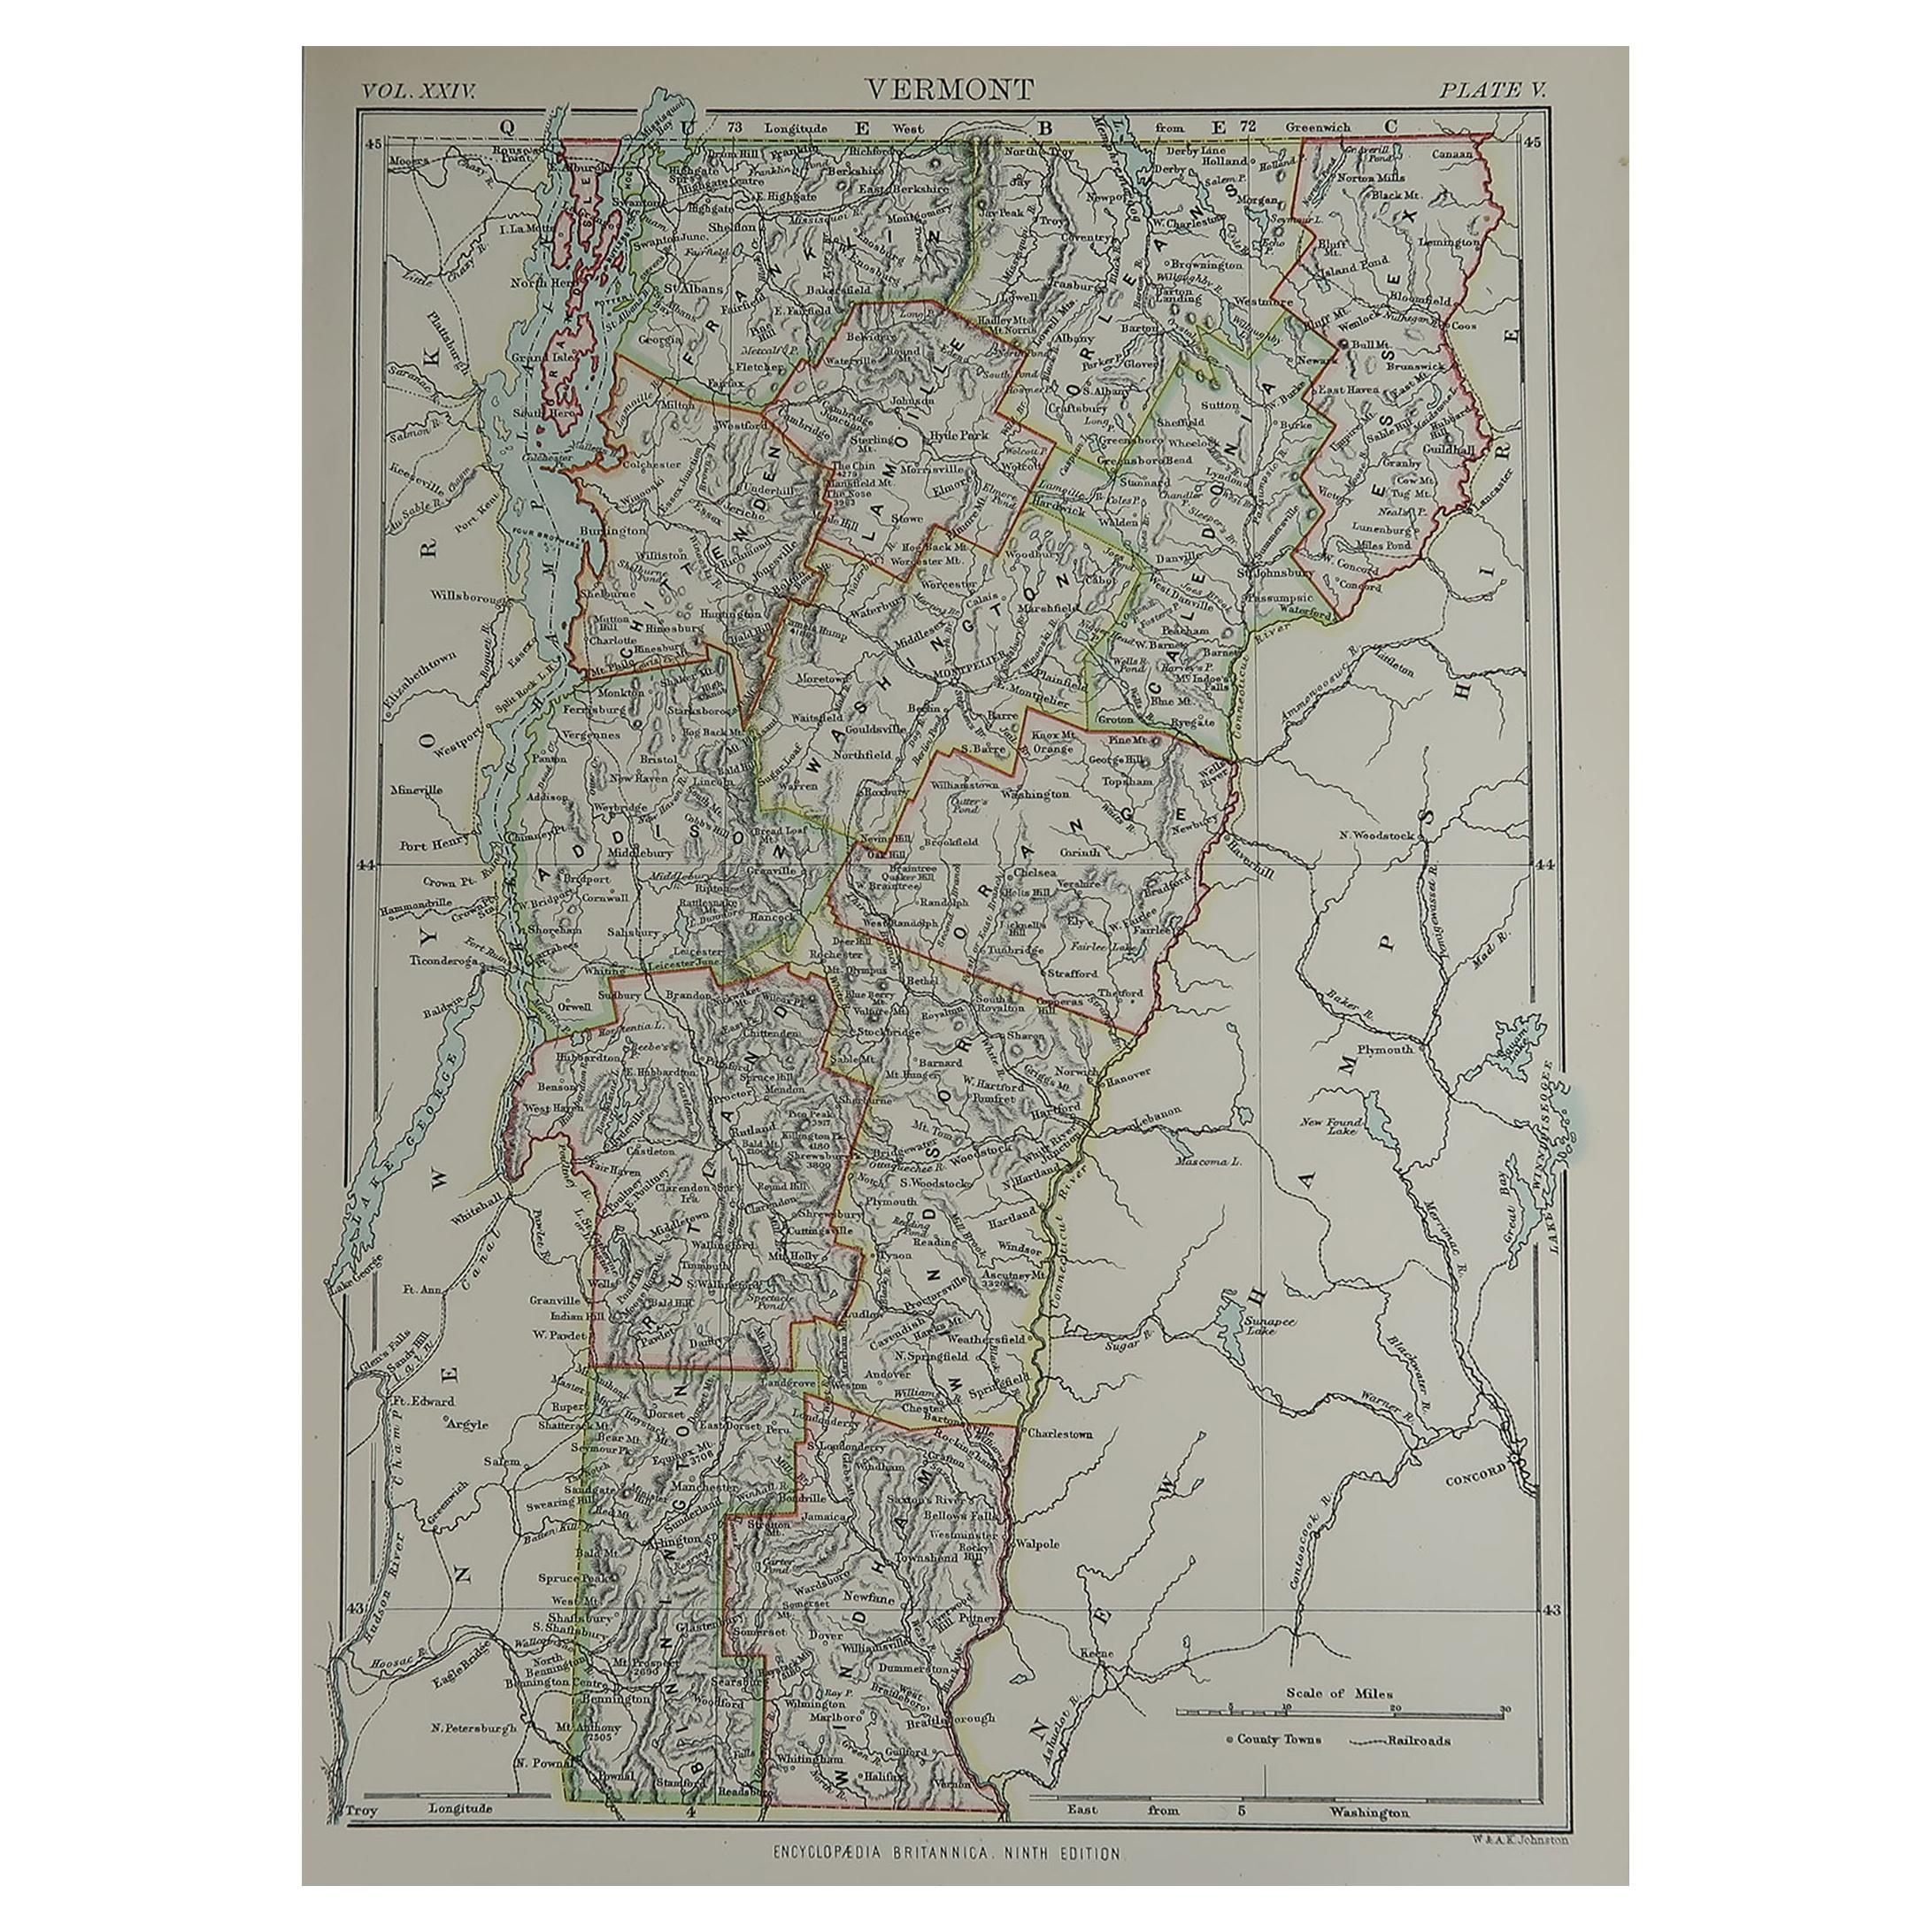 Original Antique Map of The American State of Vermont, 1889